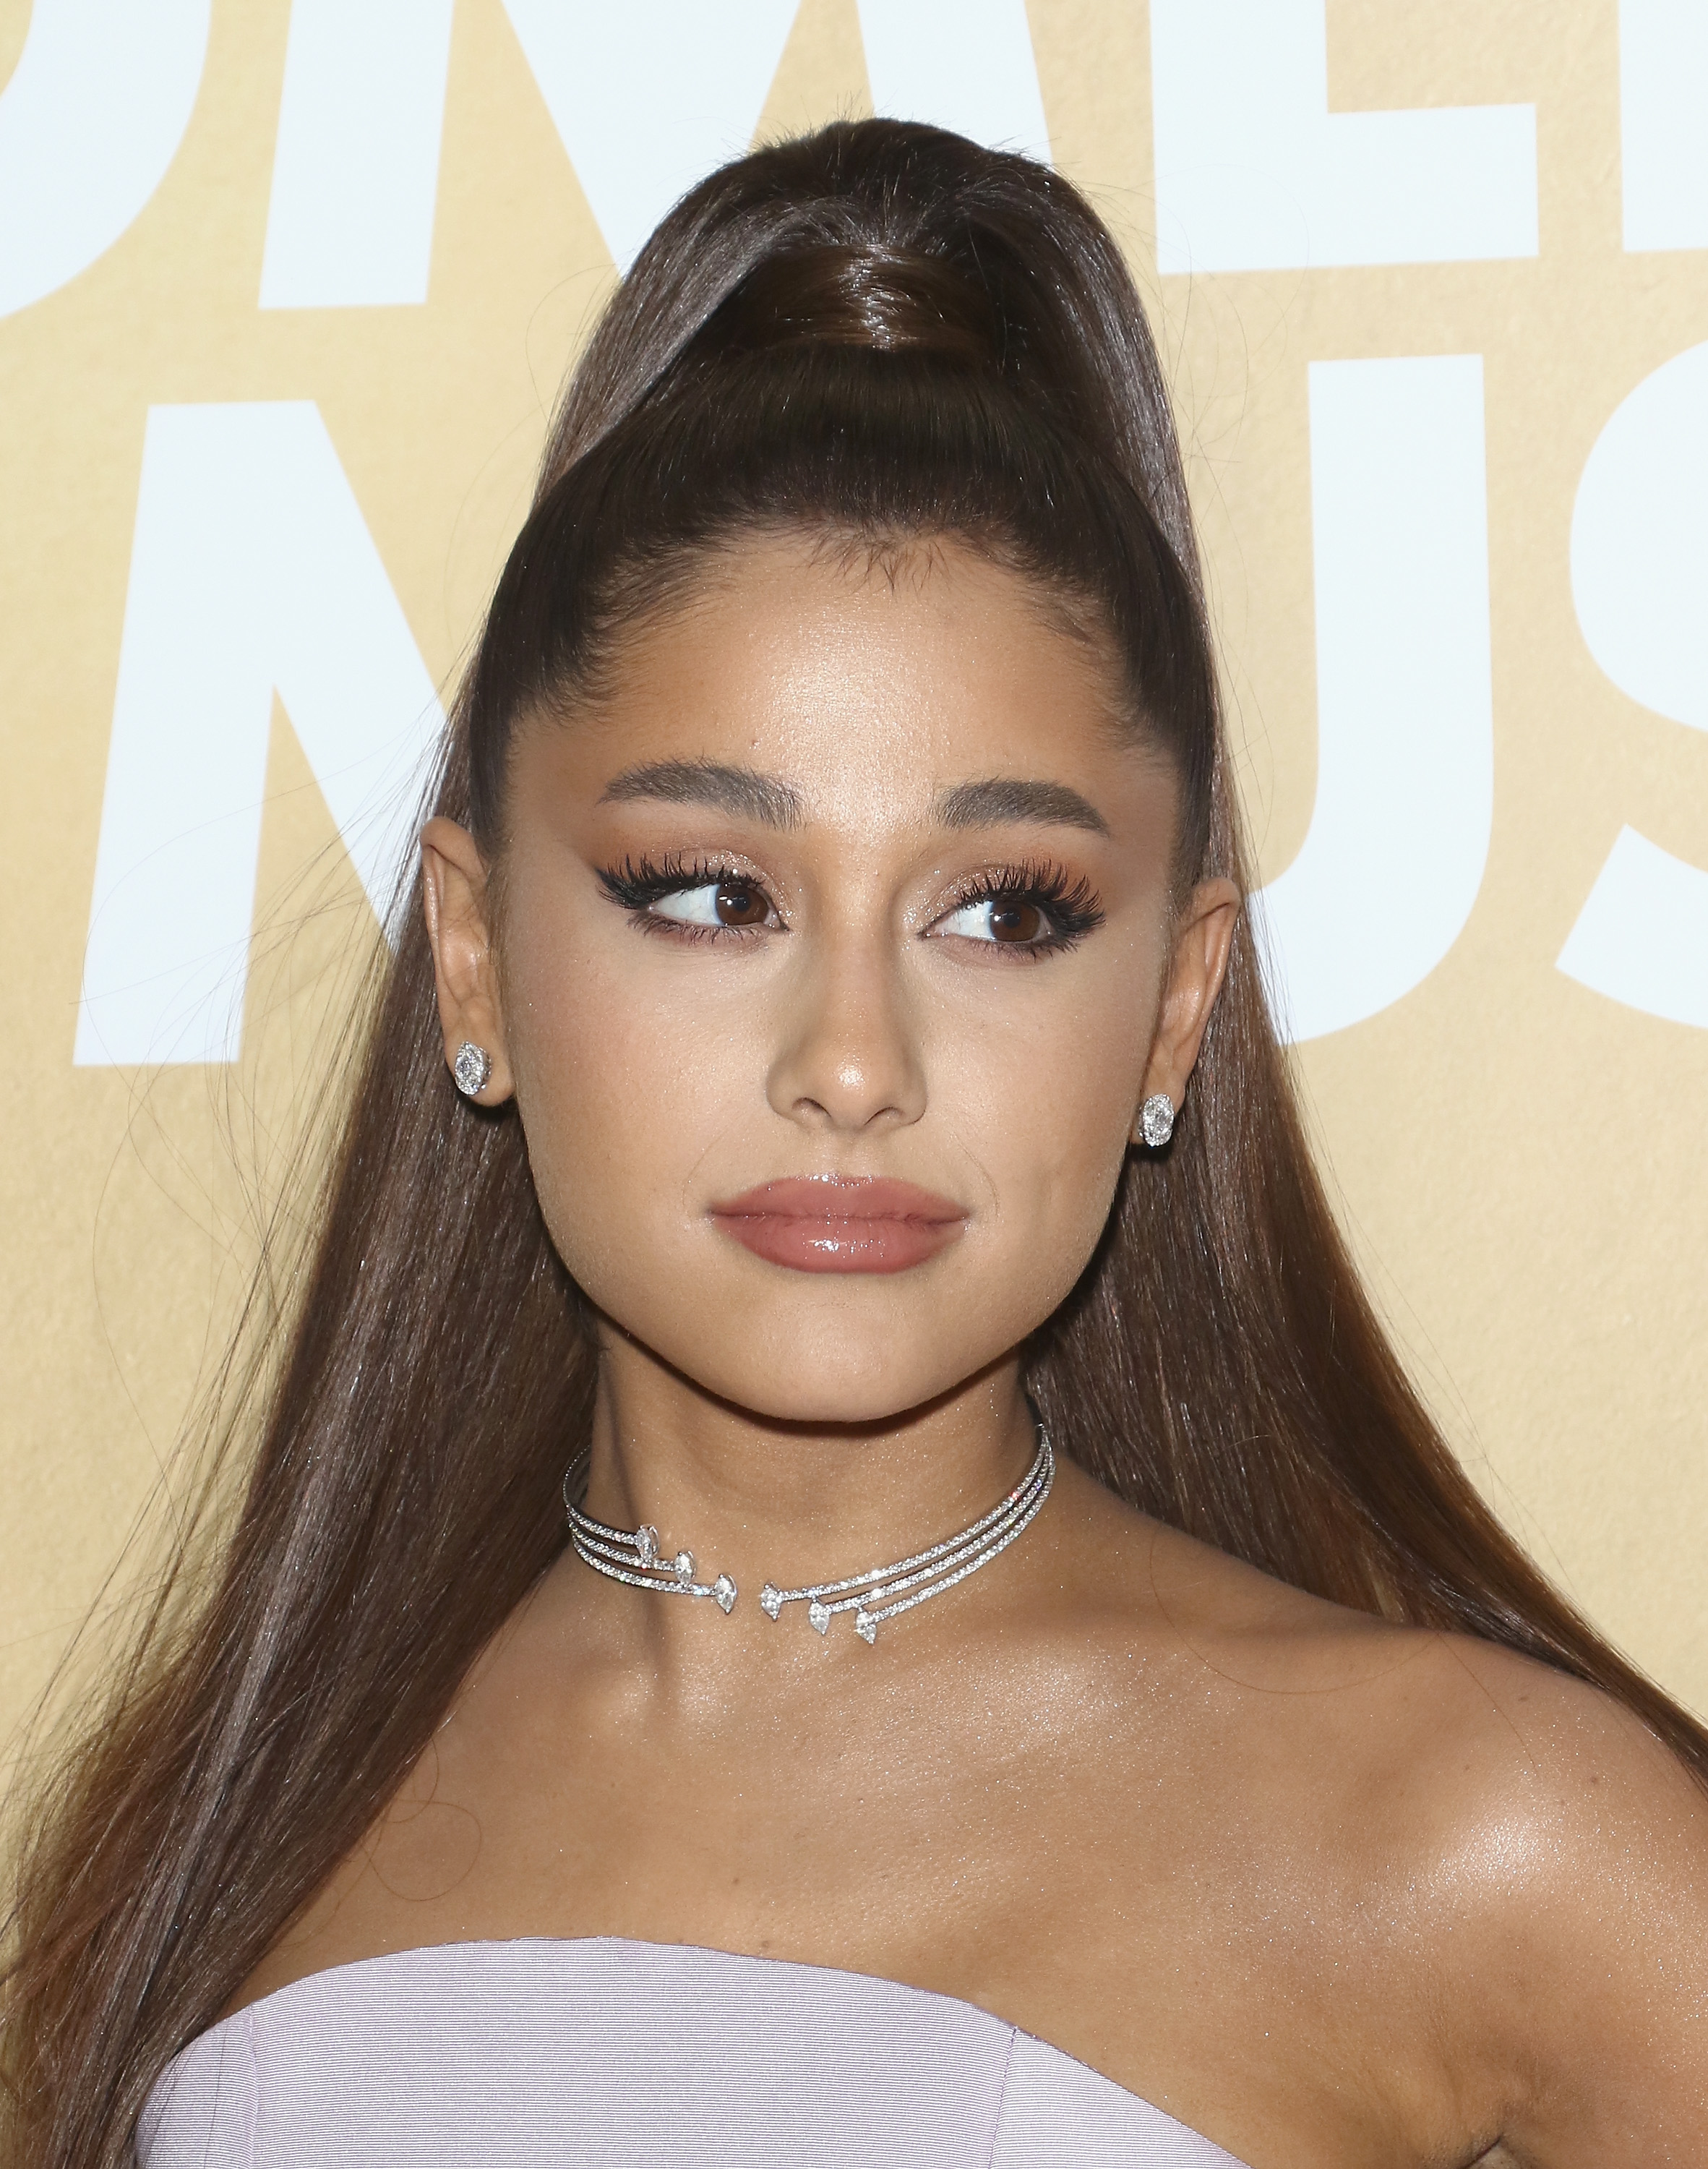 <p>In a September 2023 Vogue "Beauty Secrets" video, <a href="https://www.wonderwall.com/celebrity/profiles/overview/ariana-grande-1540.article">Ariana Grande</a> admitted that she's had "a ton of lip filler over the years and Botox," which she said she stopped getting in 2018 -- the year she's pictured here -- because she "just felt so 'too much.'" </p><p>"I just felt like hiding, you know?" she said while getting teary-eyed.</p><p>She added, "For a long time, beauty was about hiding for me. And now I feel like maybe it's not since I stopped getting fillers and Botox..."</p><p>Keep reading to see her in 2023 and to get her thoughts on resuming the plastic surgery procedures...</p><p>MORE: <a href="https://www.wonderwall.com/entertainment/tv/reality-stars-plastic-surgery-before-and-after-36588.gallery">Reality TV stars' plastic surgery procedures: Before and after photos</a></p>